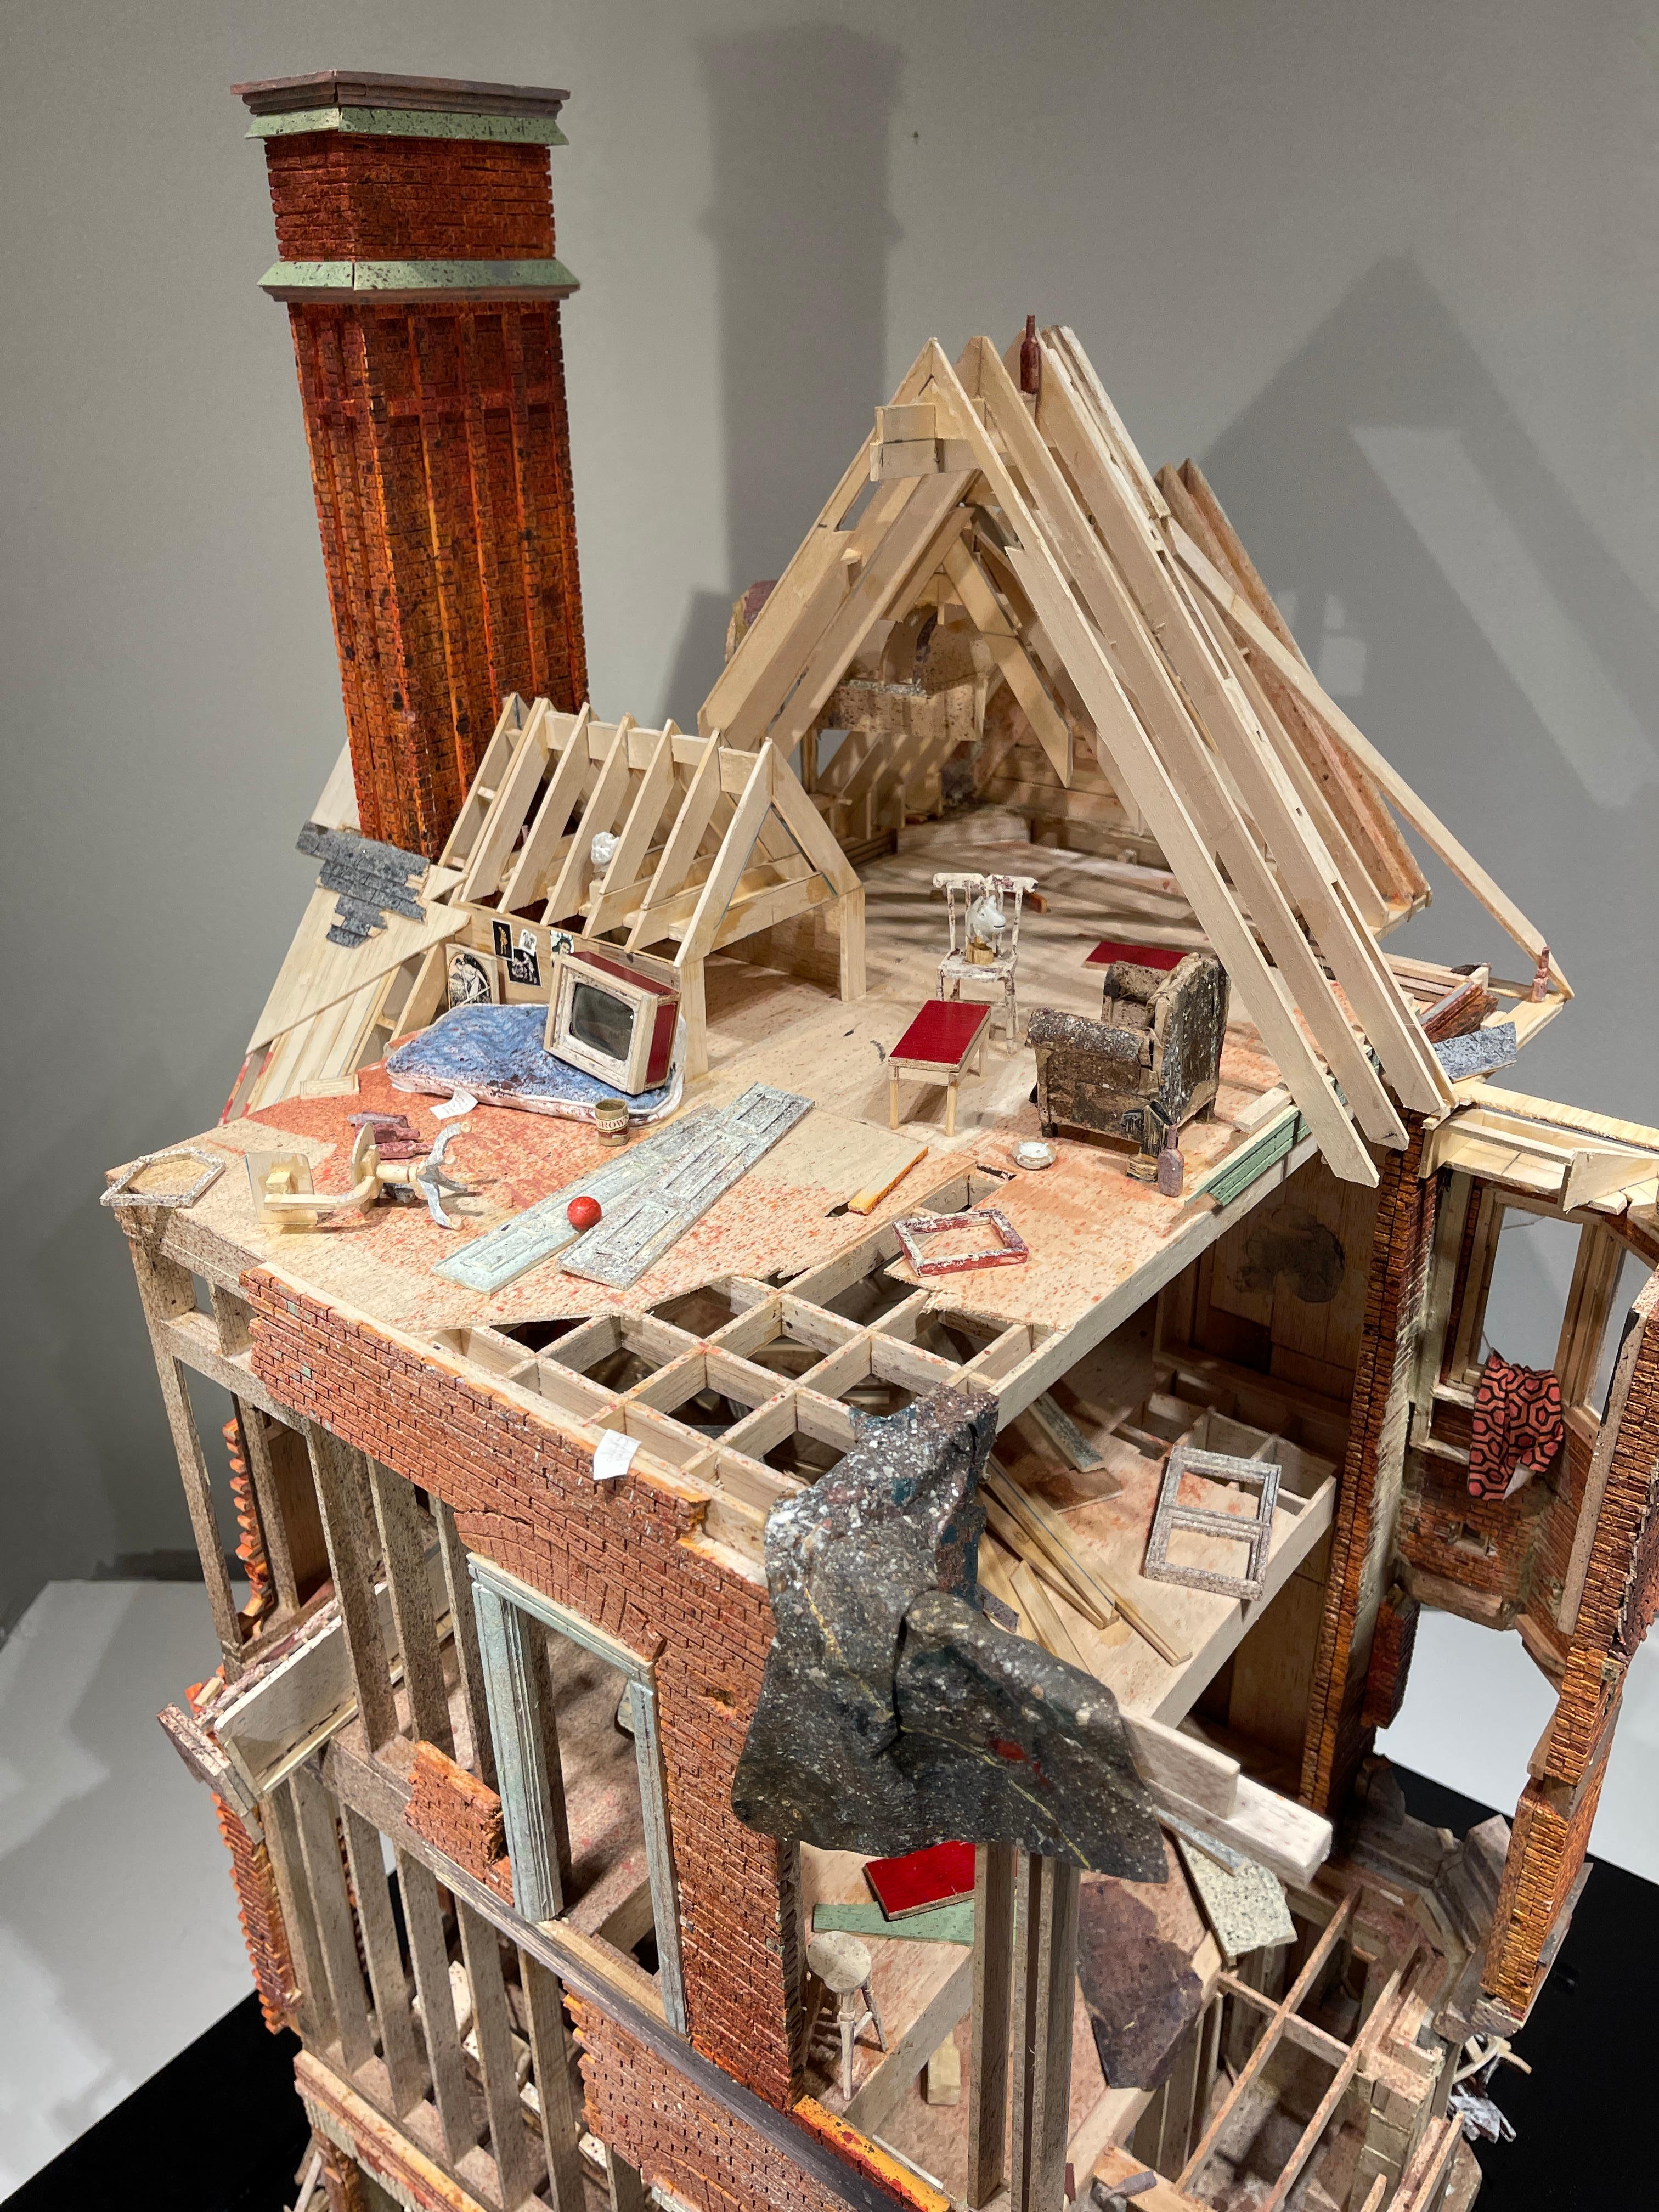 The Redpath Mansion - Highly Detailed Scale Model Sculpture, Crumbling Building - Contemporary Mixed Media Art by Ivan Markovic